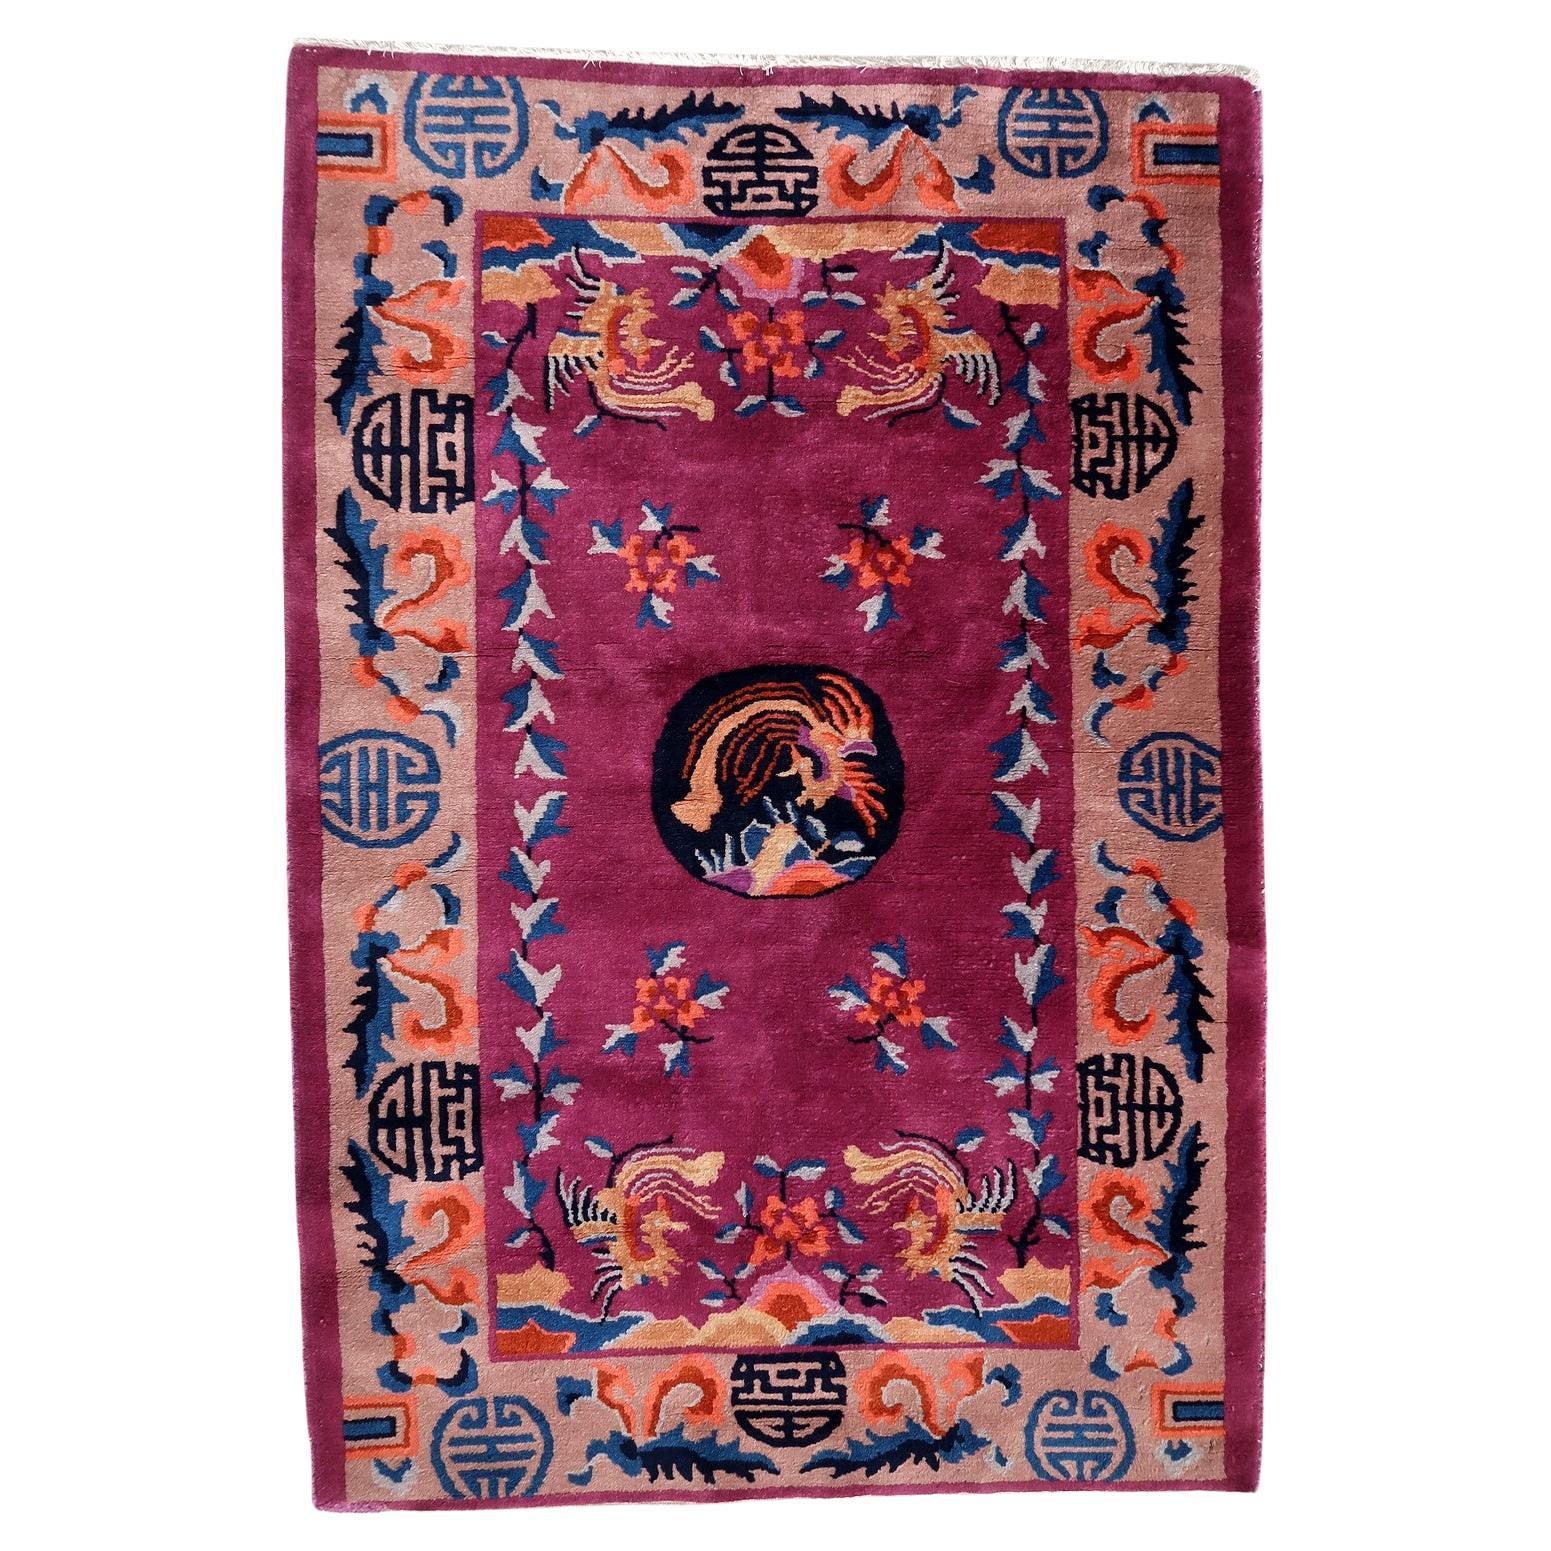 Handmade Antique Art Deco Chinese Rug - Front View - 3.1' x 4.5' - 1920s